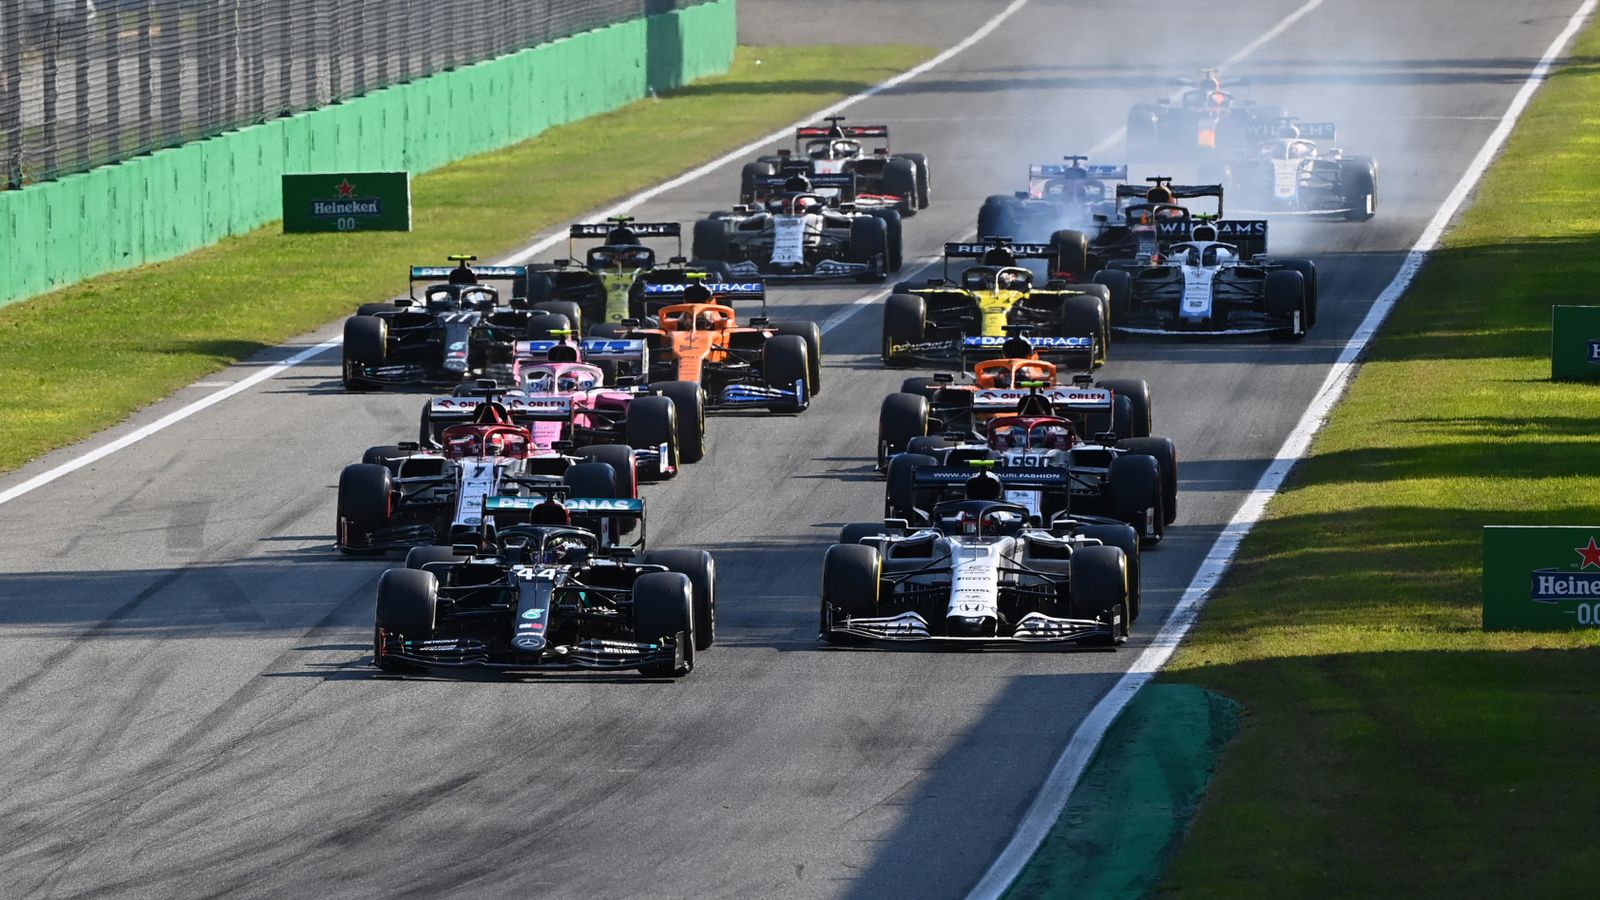 F1 Sprint's second outing of 2021 season confirmed for Italian Grand